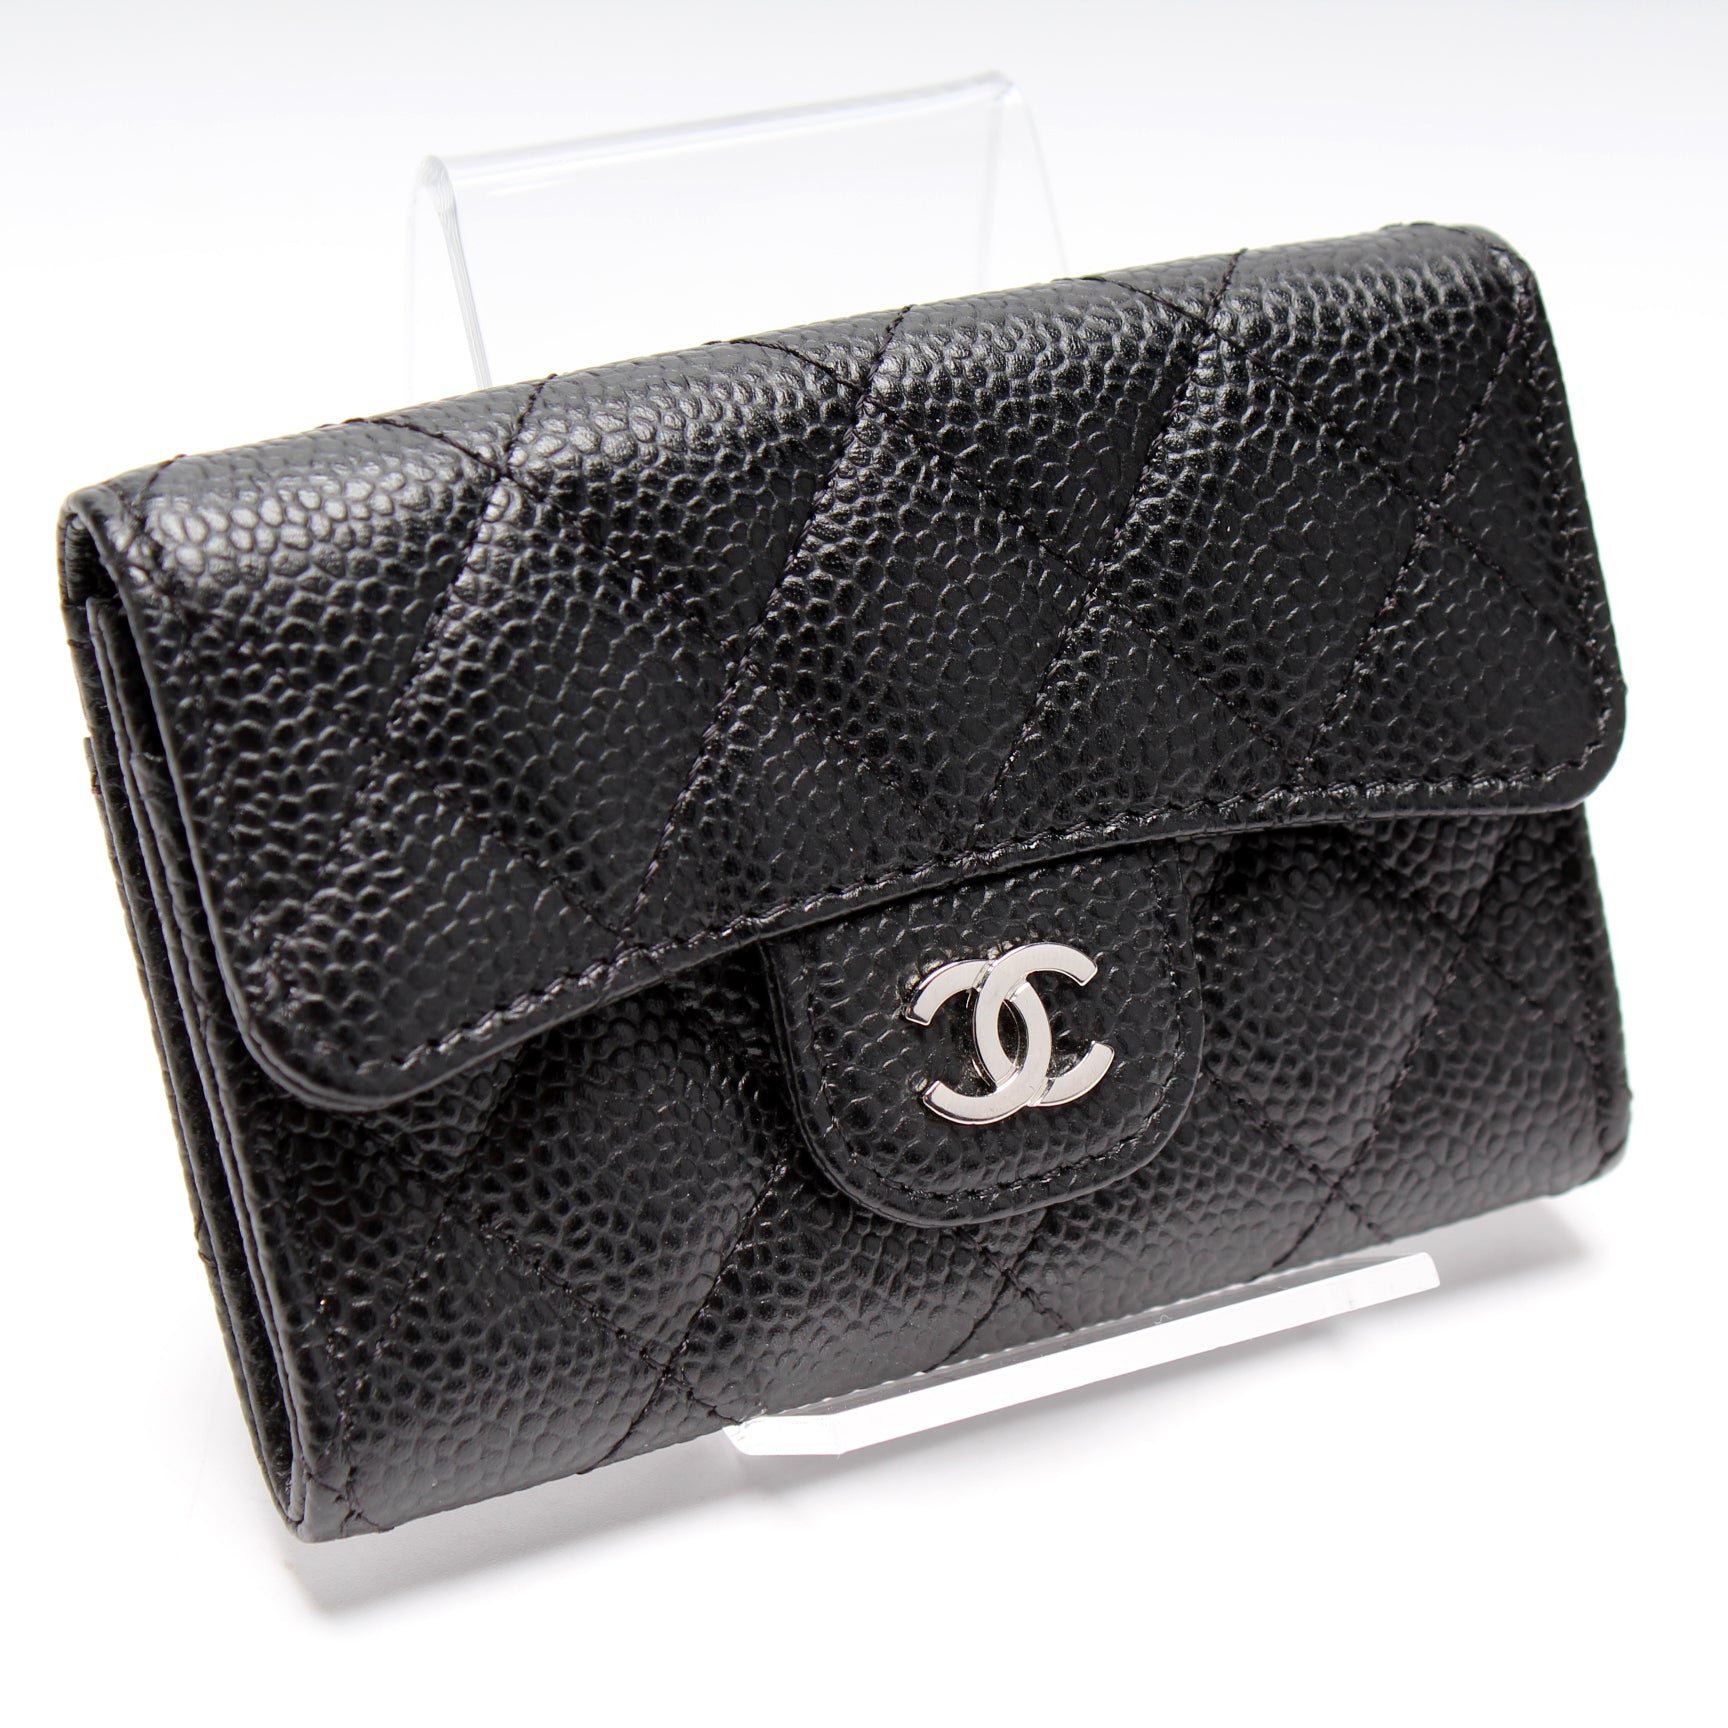 New Chanel business card holder